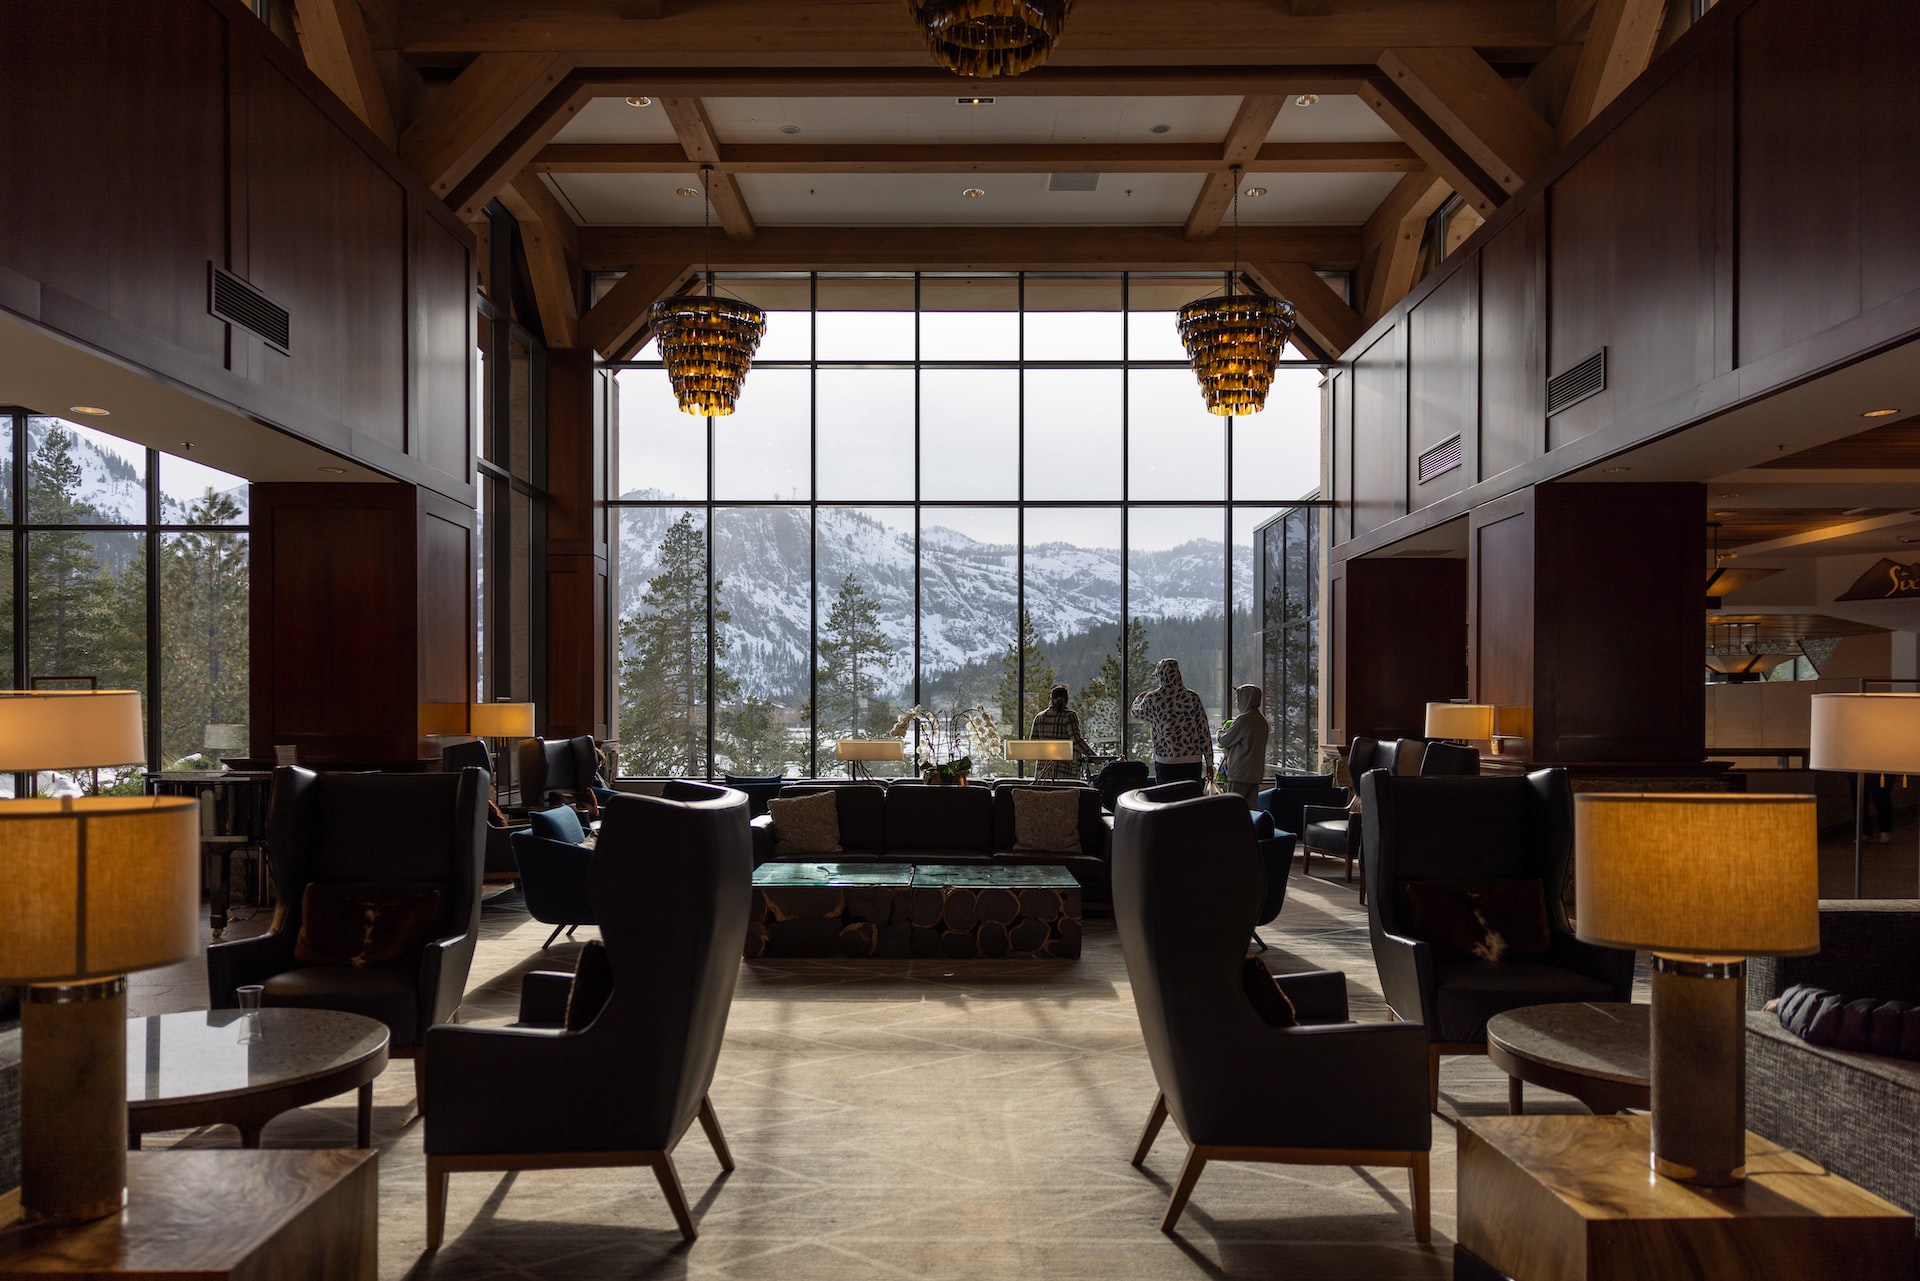 An indoors shot of Squaw Valley Lodge's modern interior.